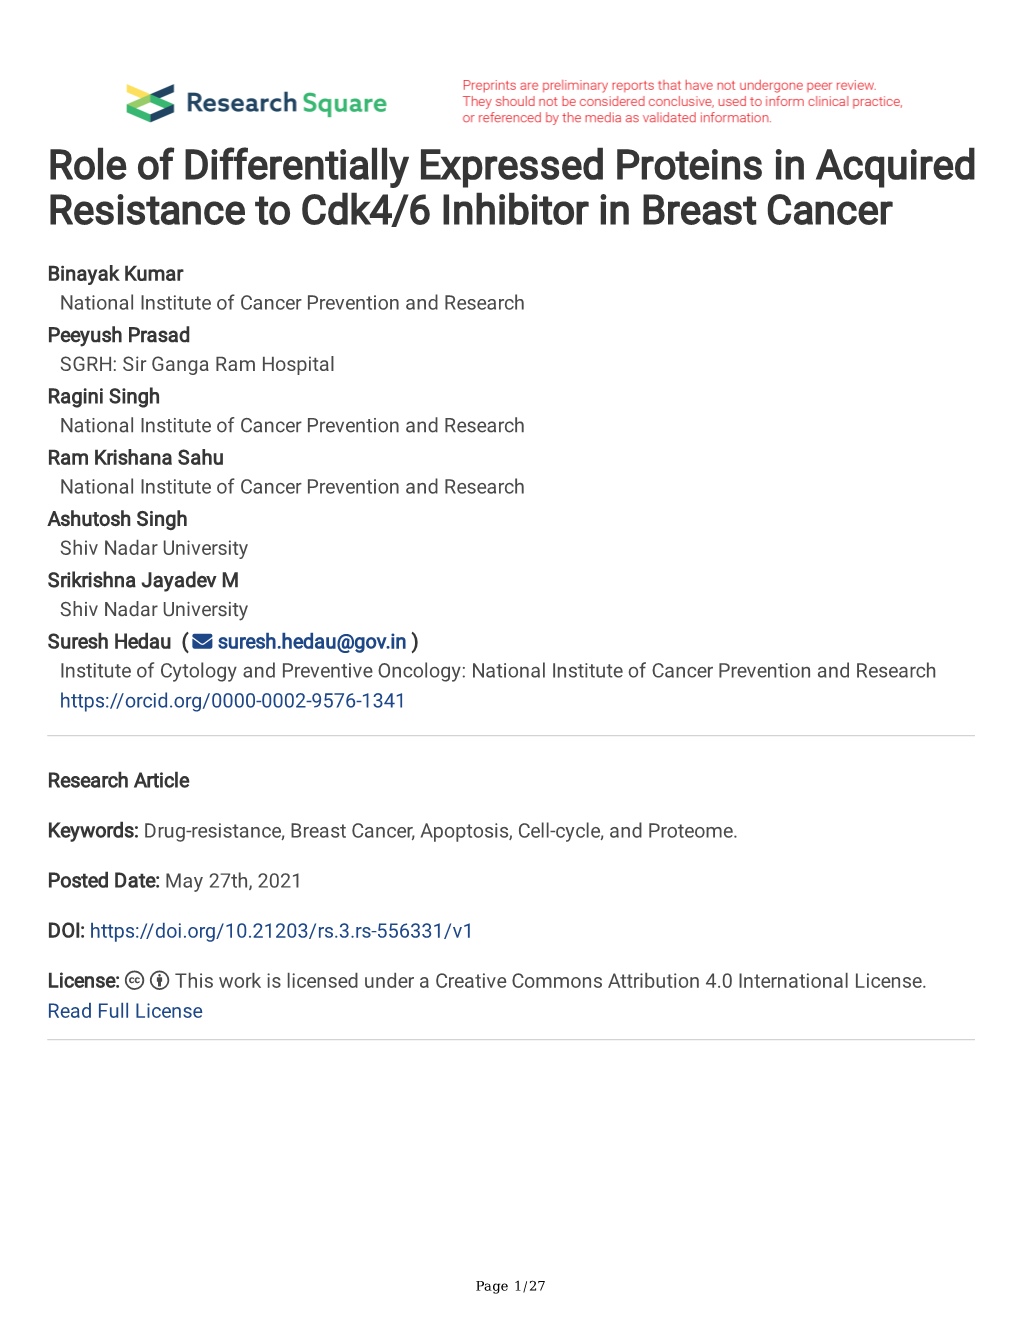 Role of Differentially Expressed Proteins in Acquired Resistance to Cdk4/6 Inhibitor in Breast Cancer